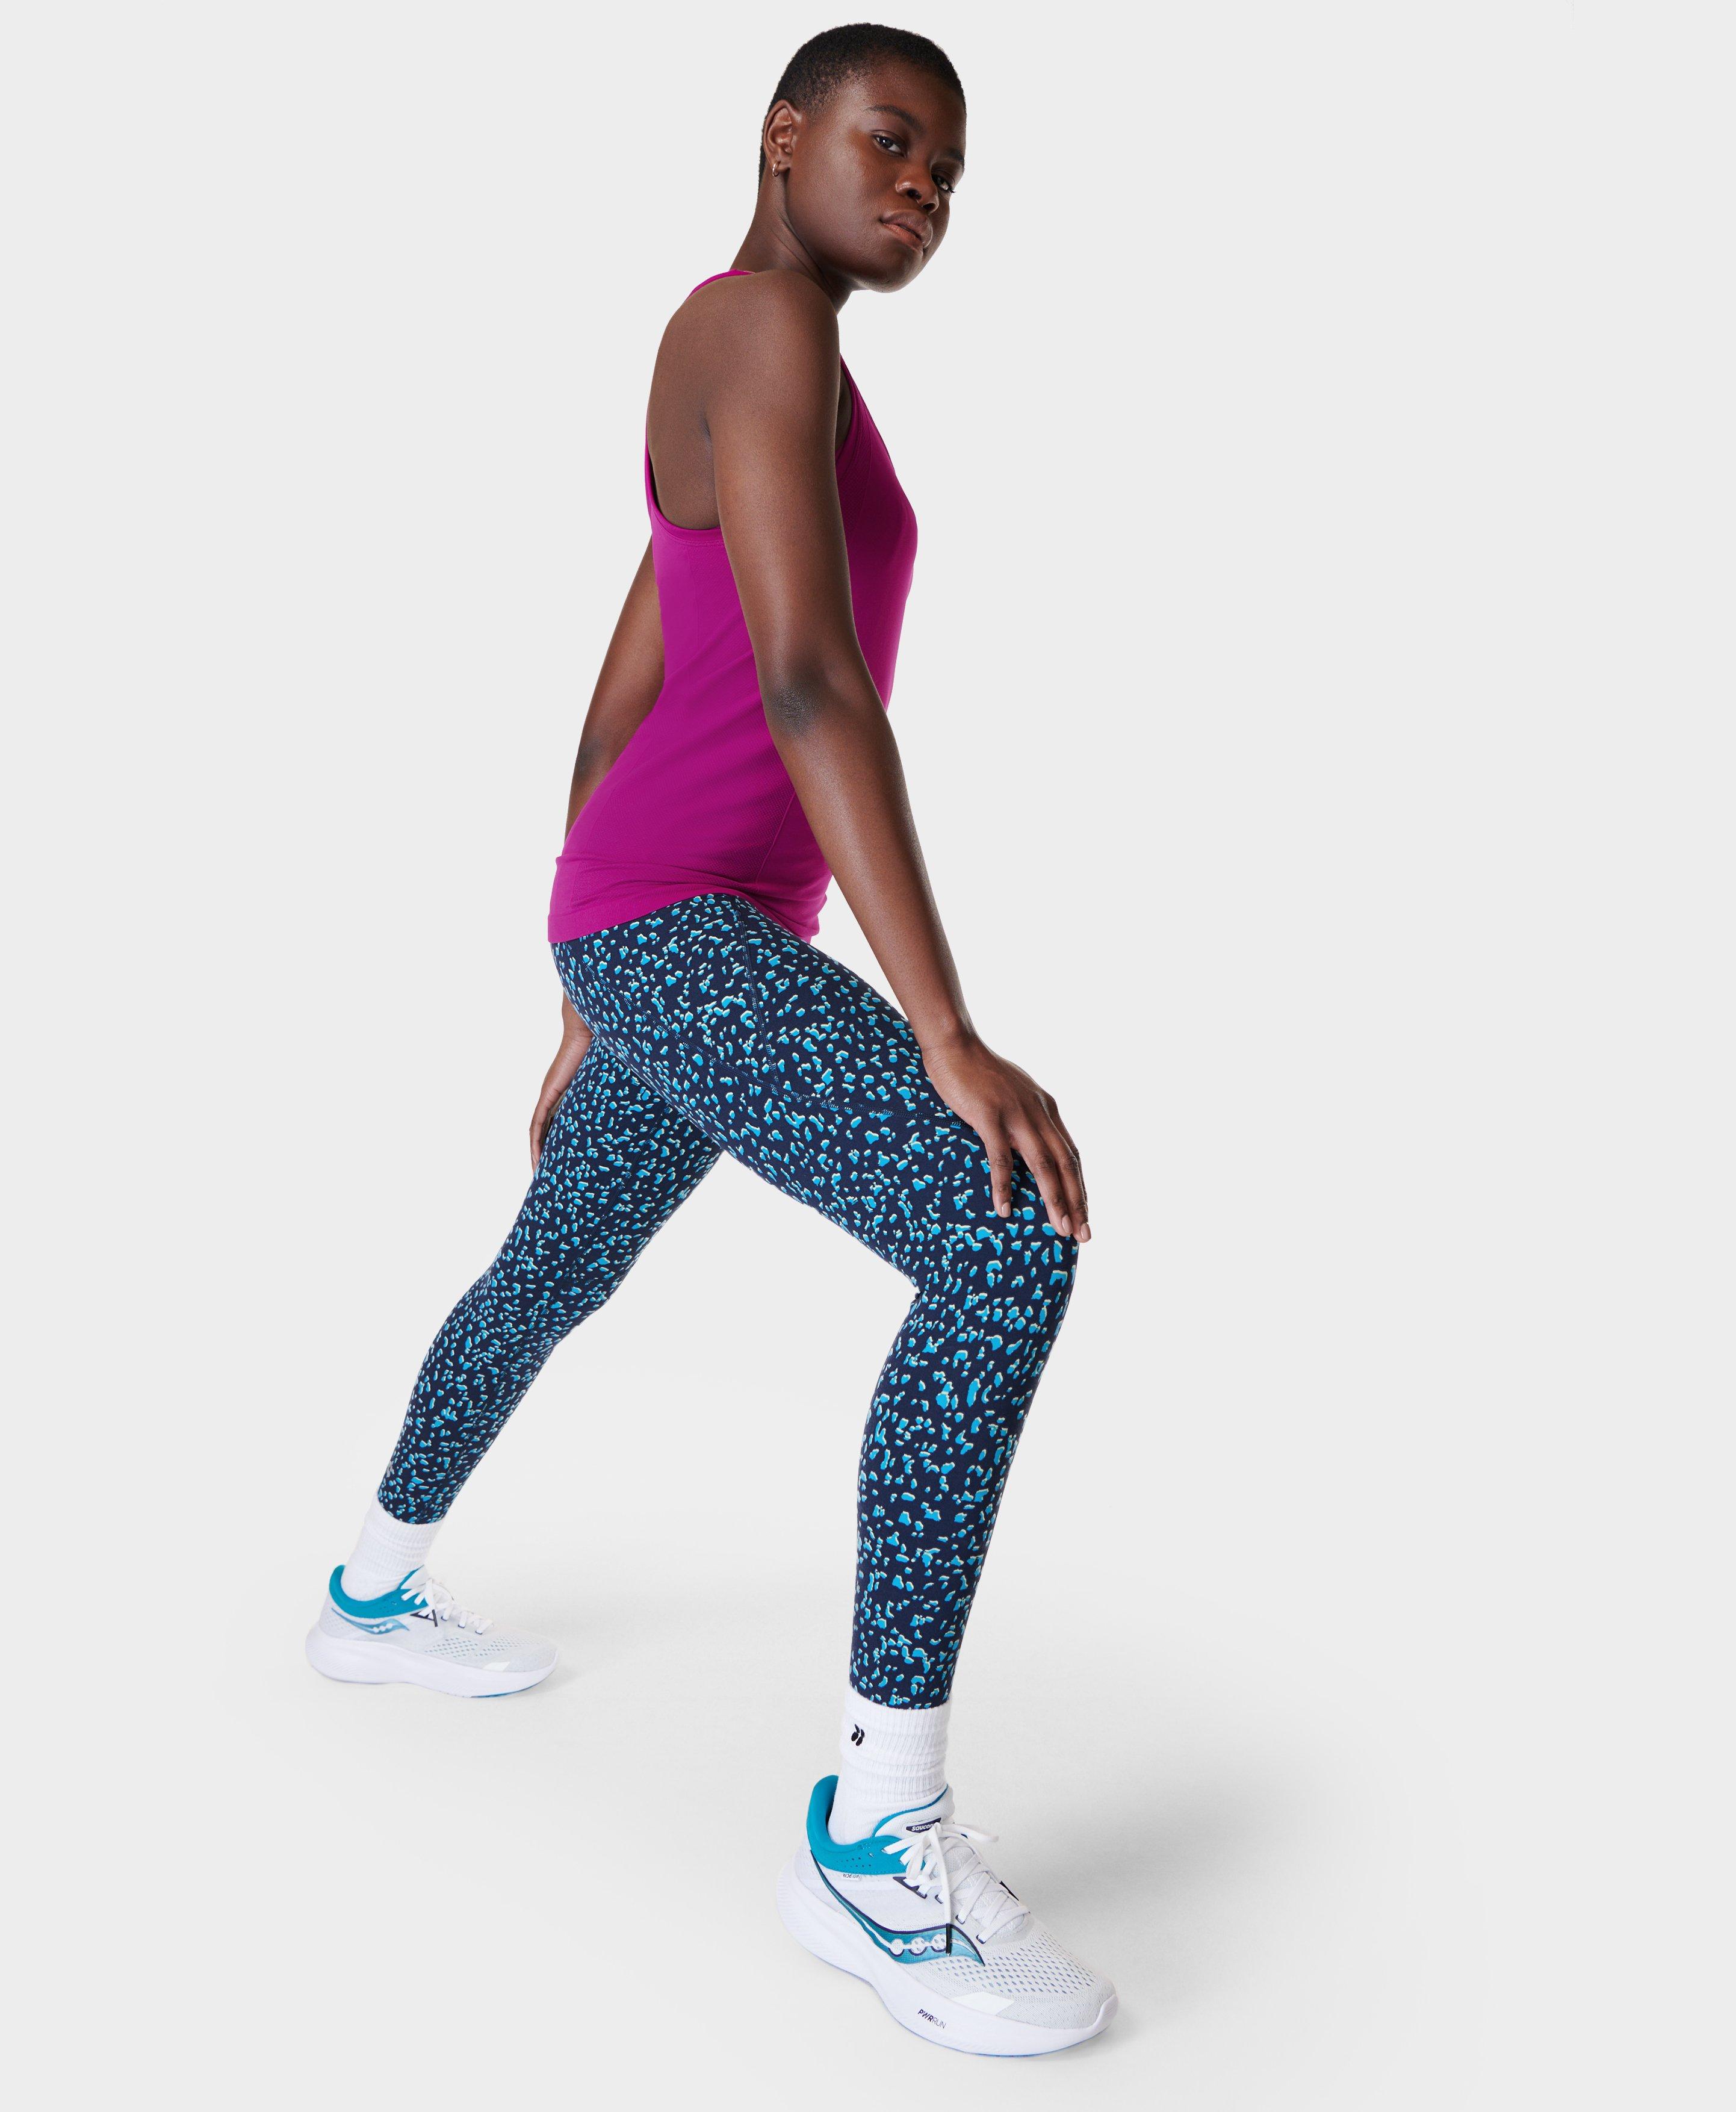 Sweaty Betty 50% Off Sale: 15 Of The Best Activewear Pieces